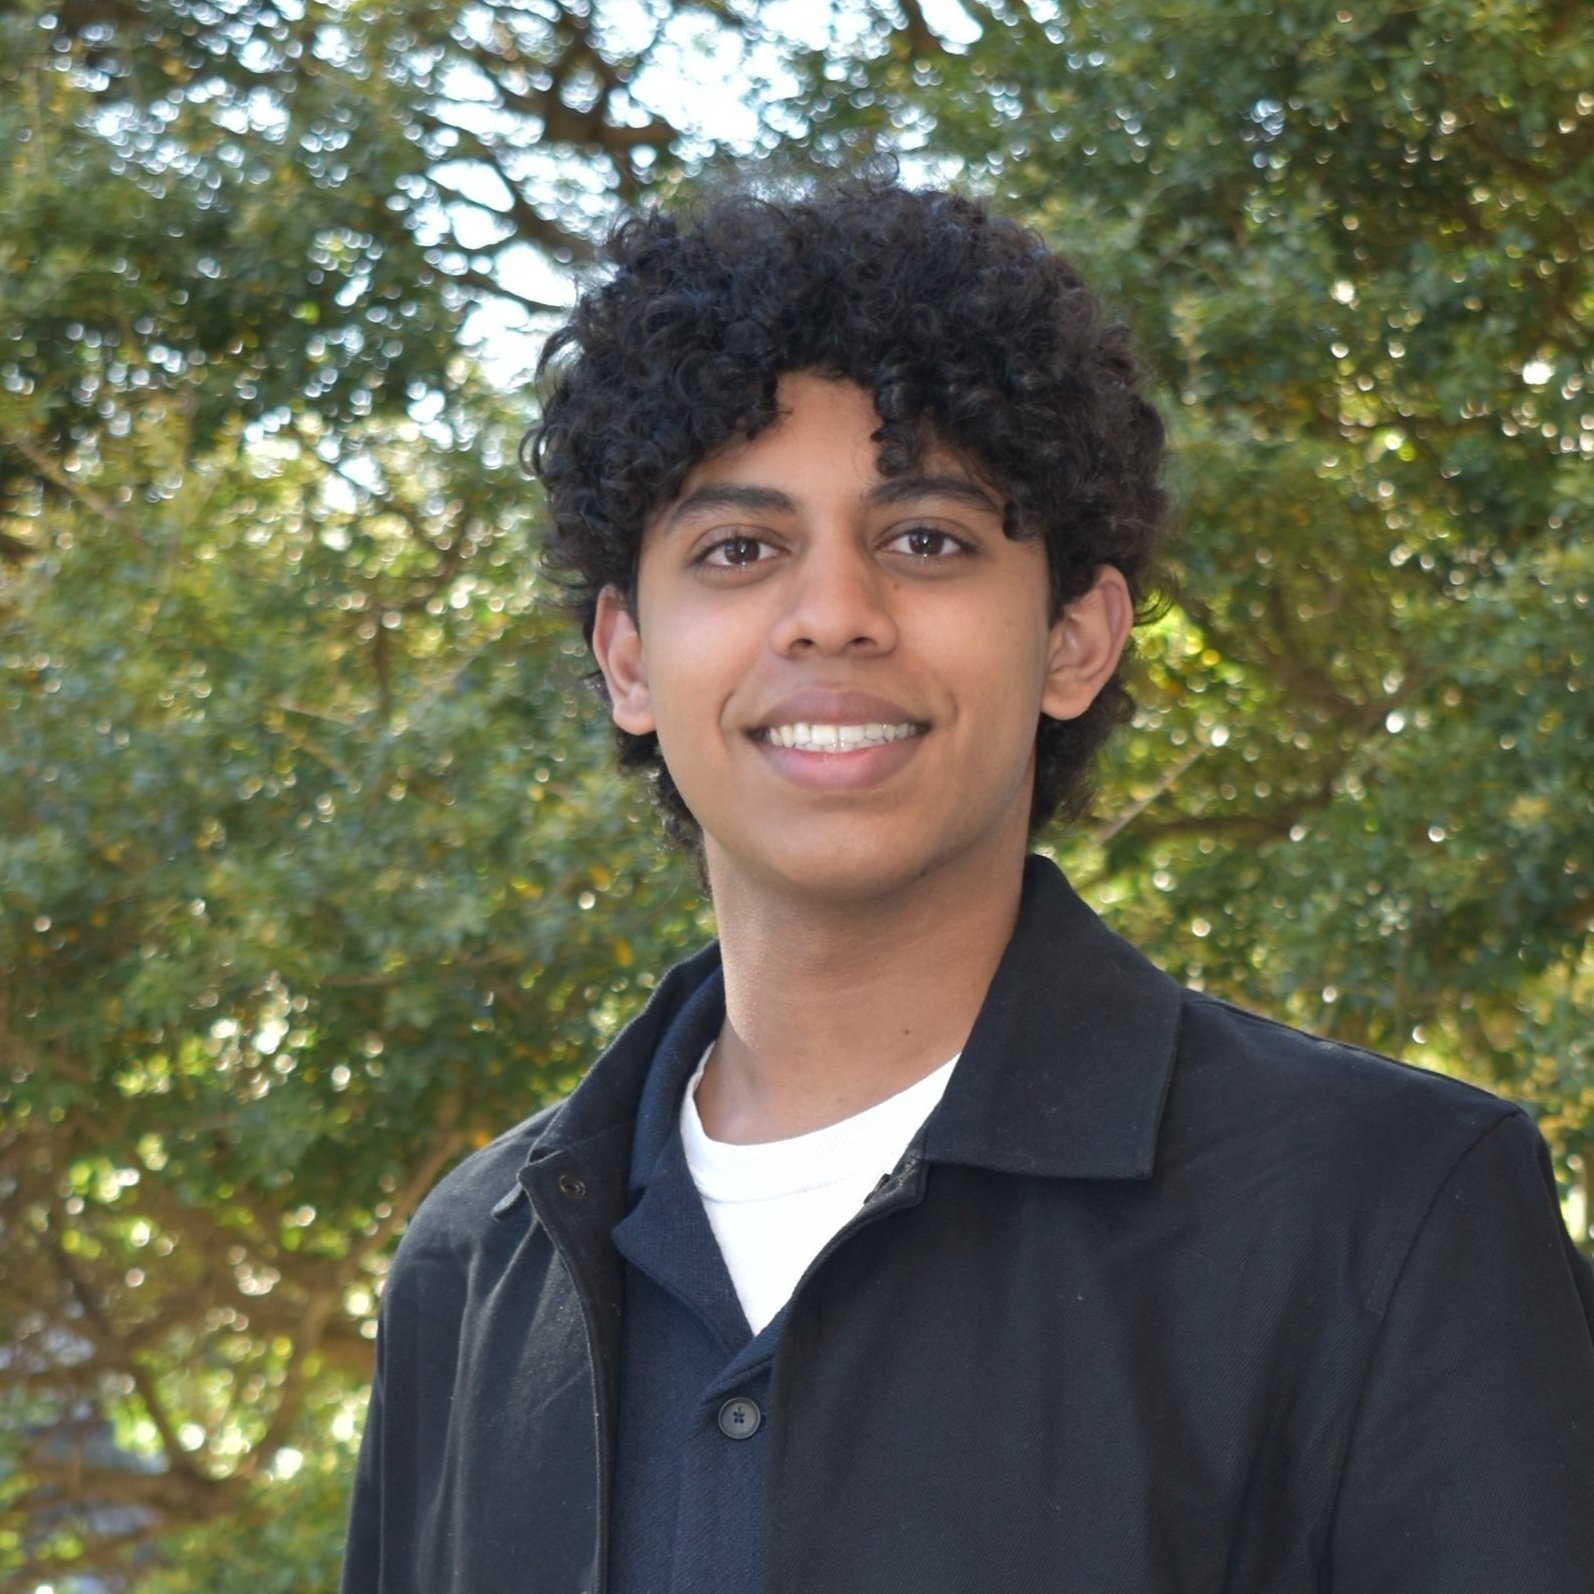  Tamal Pilla is a sophomore at Southern Methodist University, studying History and Business Analytics with minors in Religious Studies and Asian Studies. A Dallas Doing Good neophyte, Tamal has rekindled his high school-era passion for journalism and